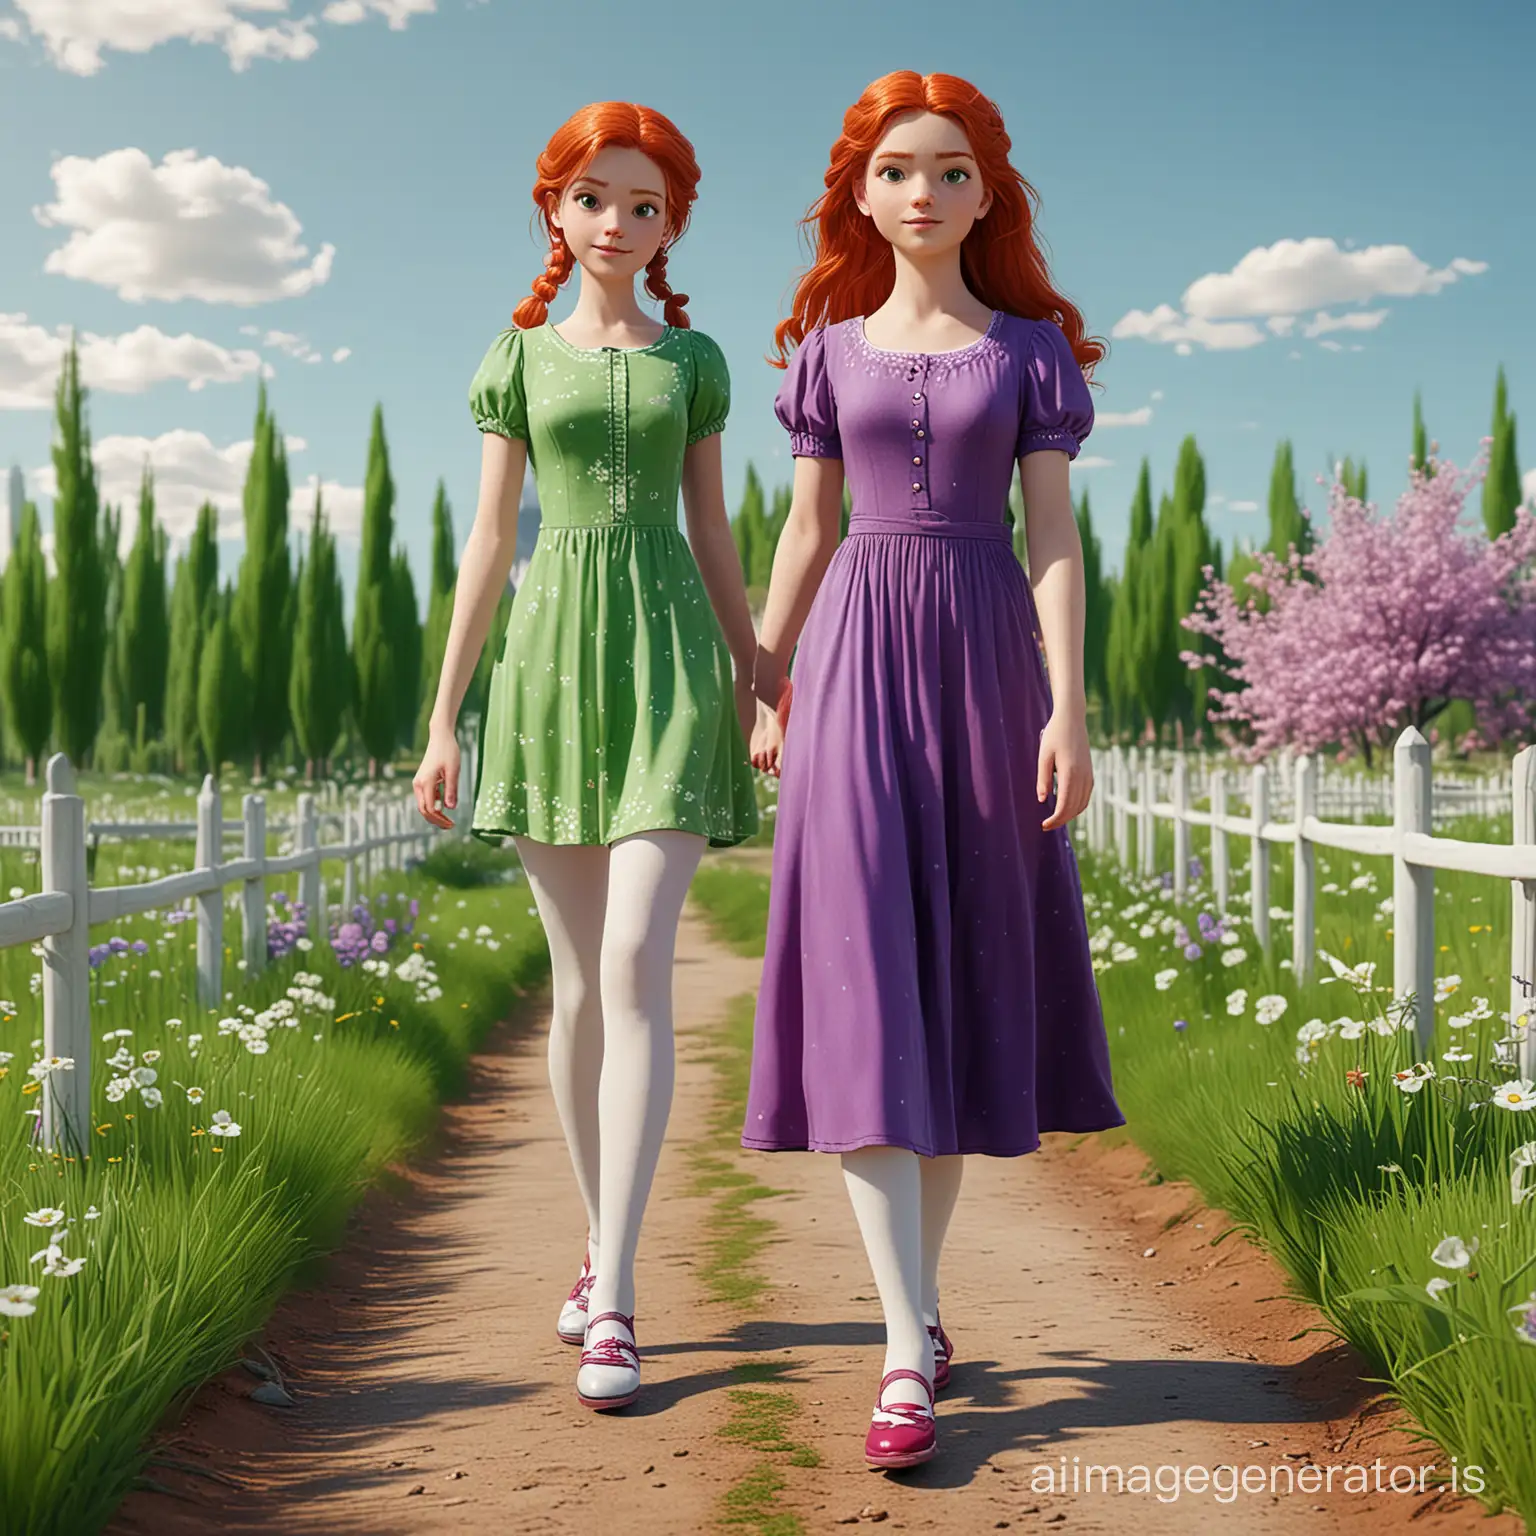 Stylized 3D graphics: a spring landscape and a girl with green eyes, red hair dressed in a green dress with short-sleeved maxi length, white tights, purple shoes